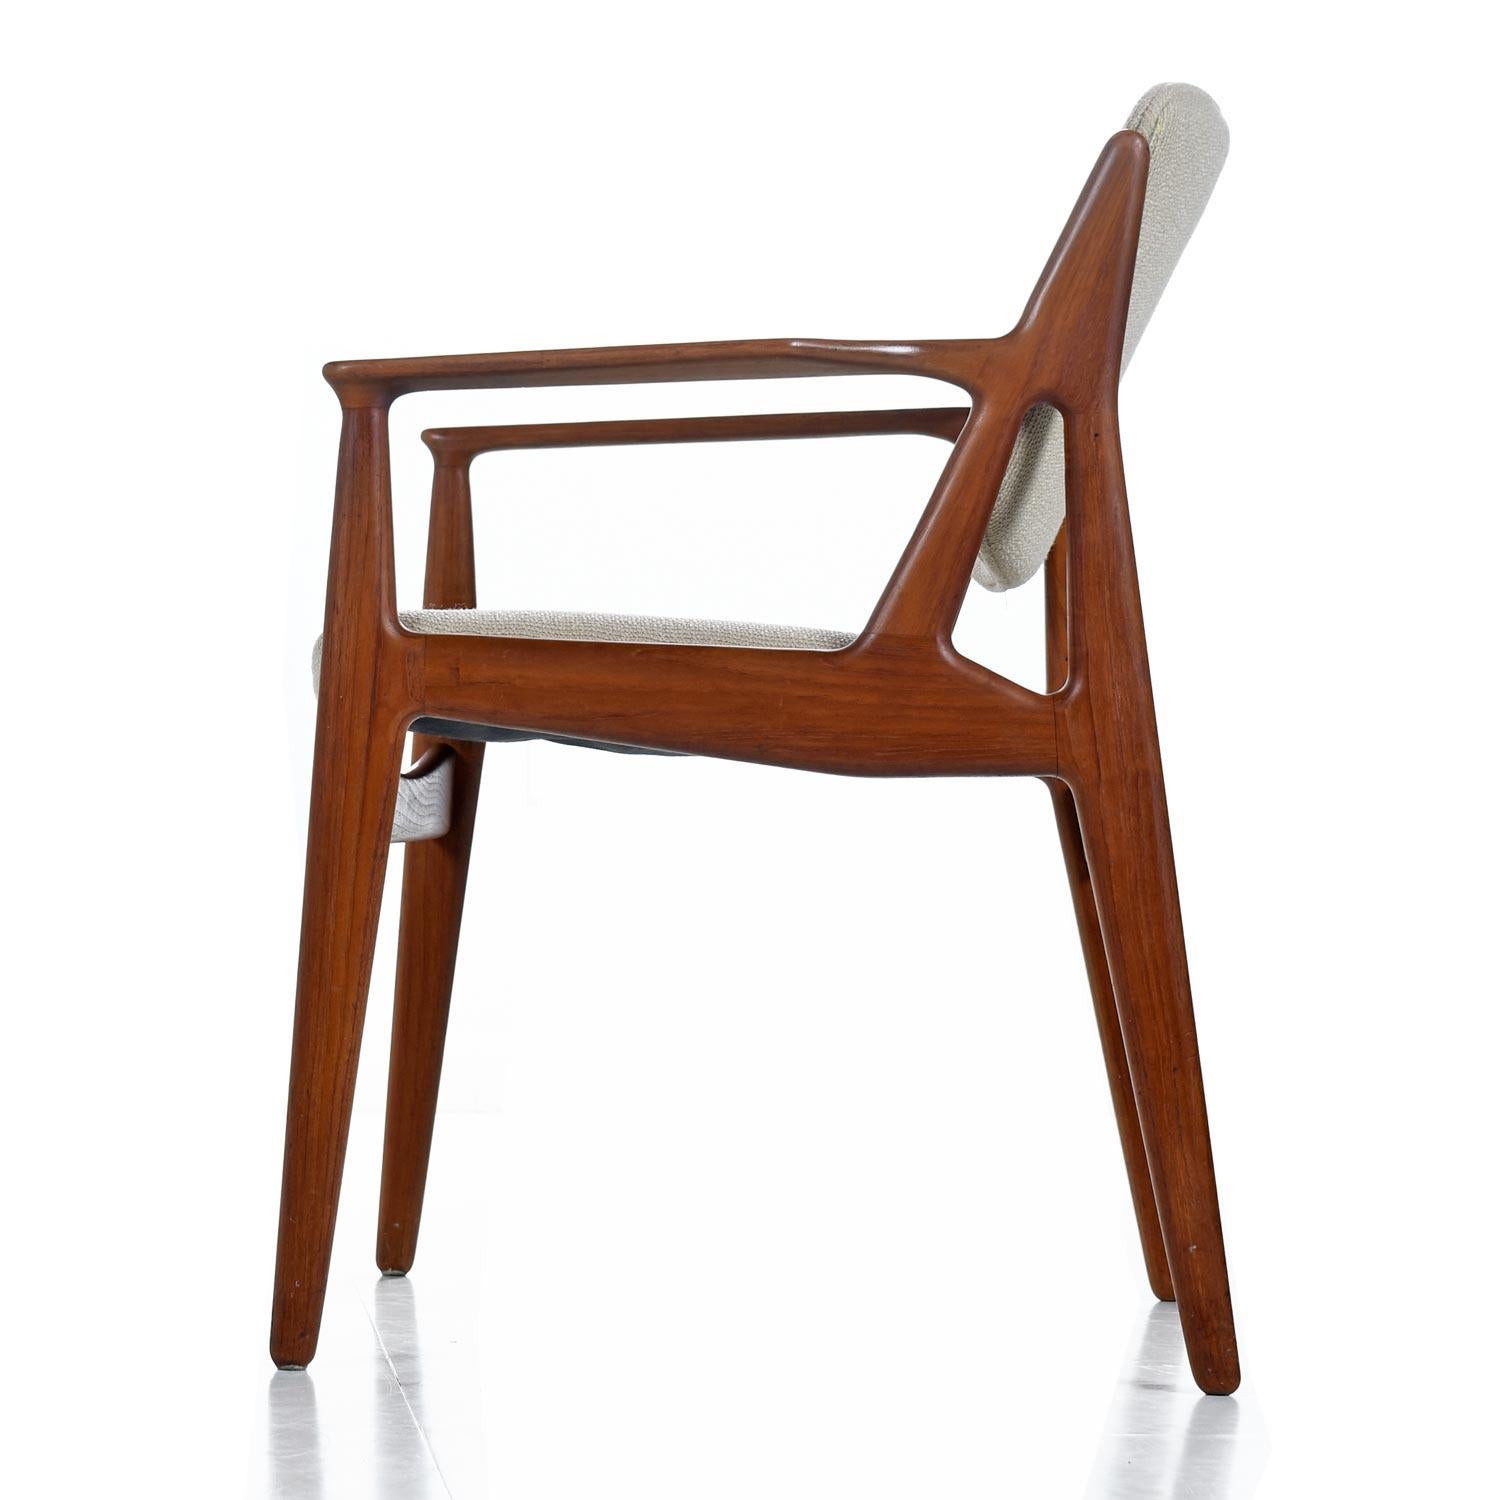 Set of six Mid-Century Modern Danish solid teak dining chairs designed by Arne Vodder for Vamo Sonderborg. The chairs have been recently re-covered in a high quality, nubby beige upholstery. The fabric is age appropriate and soft to the tough. The